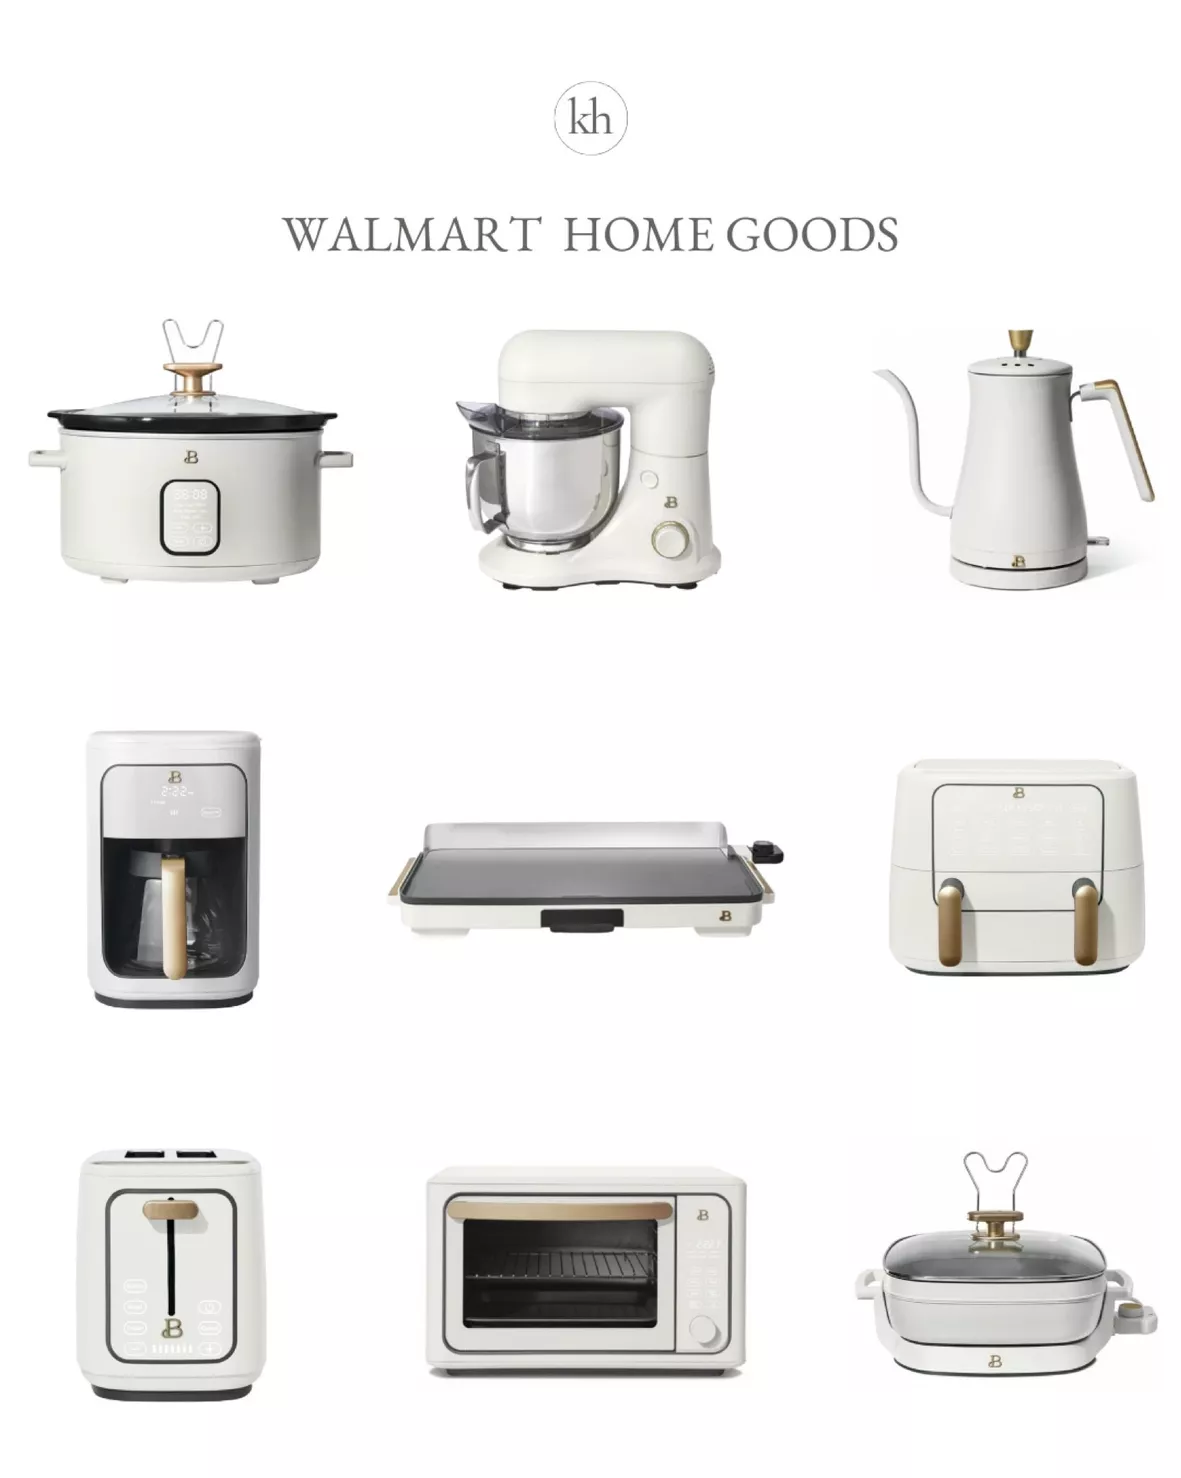 These 5 kitchen appliances from Drew Barrymore's kitchen line at